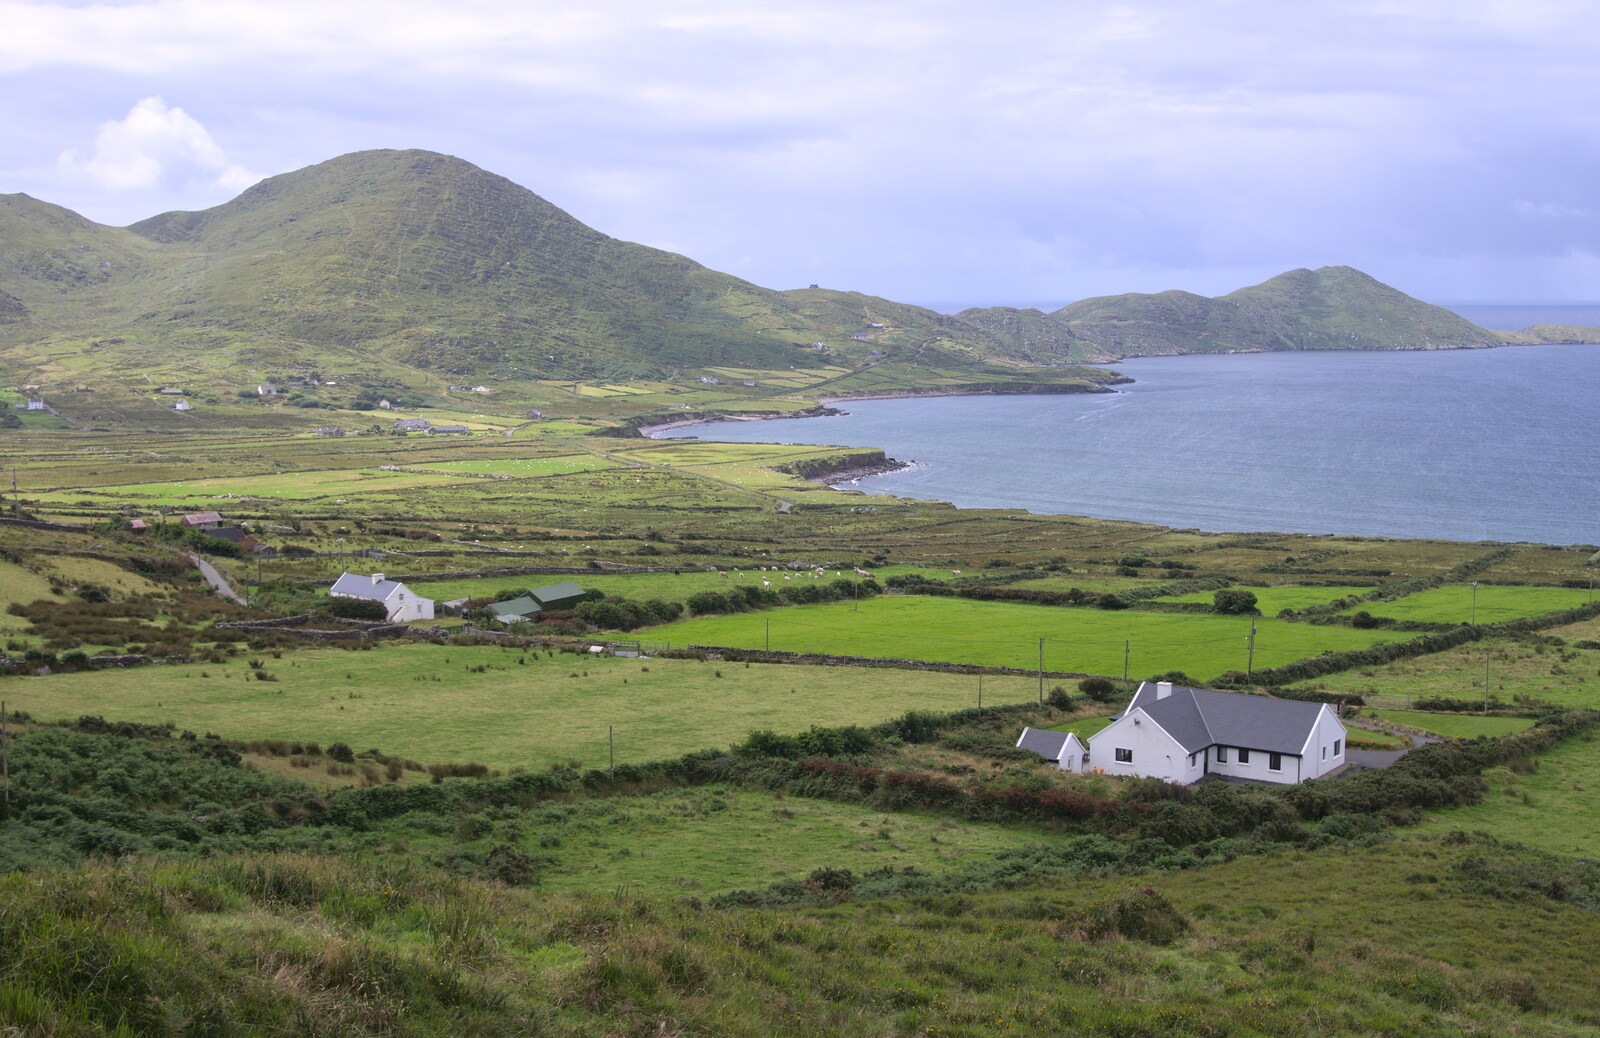 We see some nice views on the way to Sneem from Baile an Sceilg to An tSnaidhme, Co. Kerry, Ireland - 31st July 2017